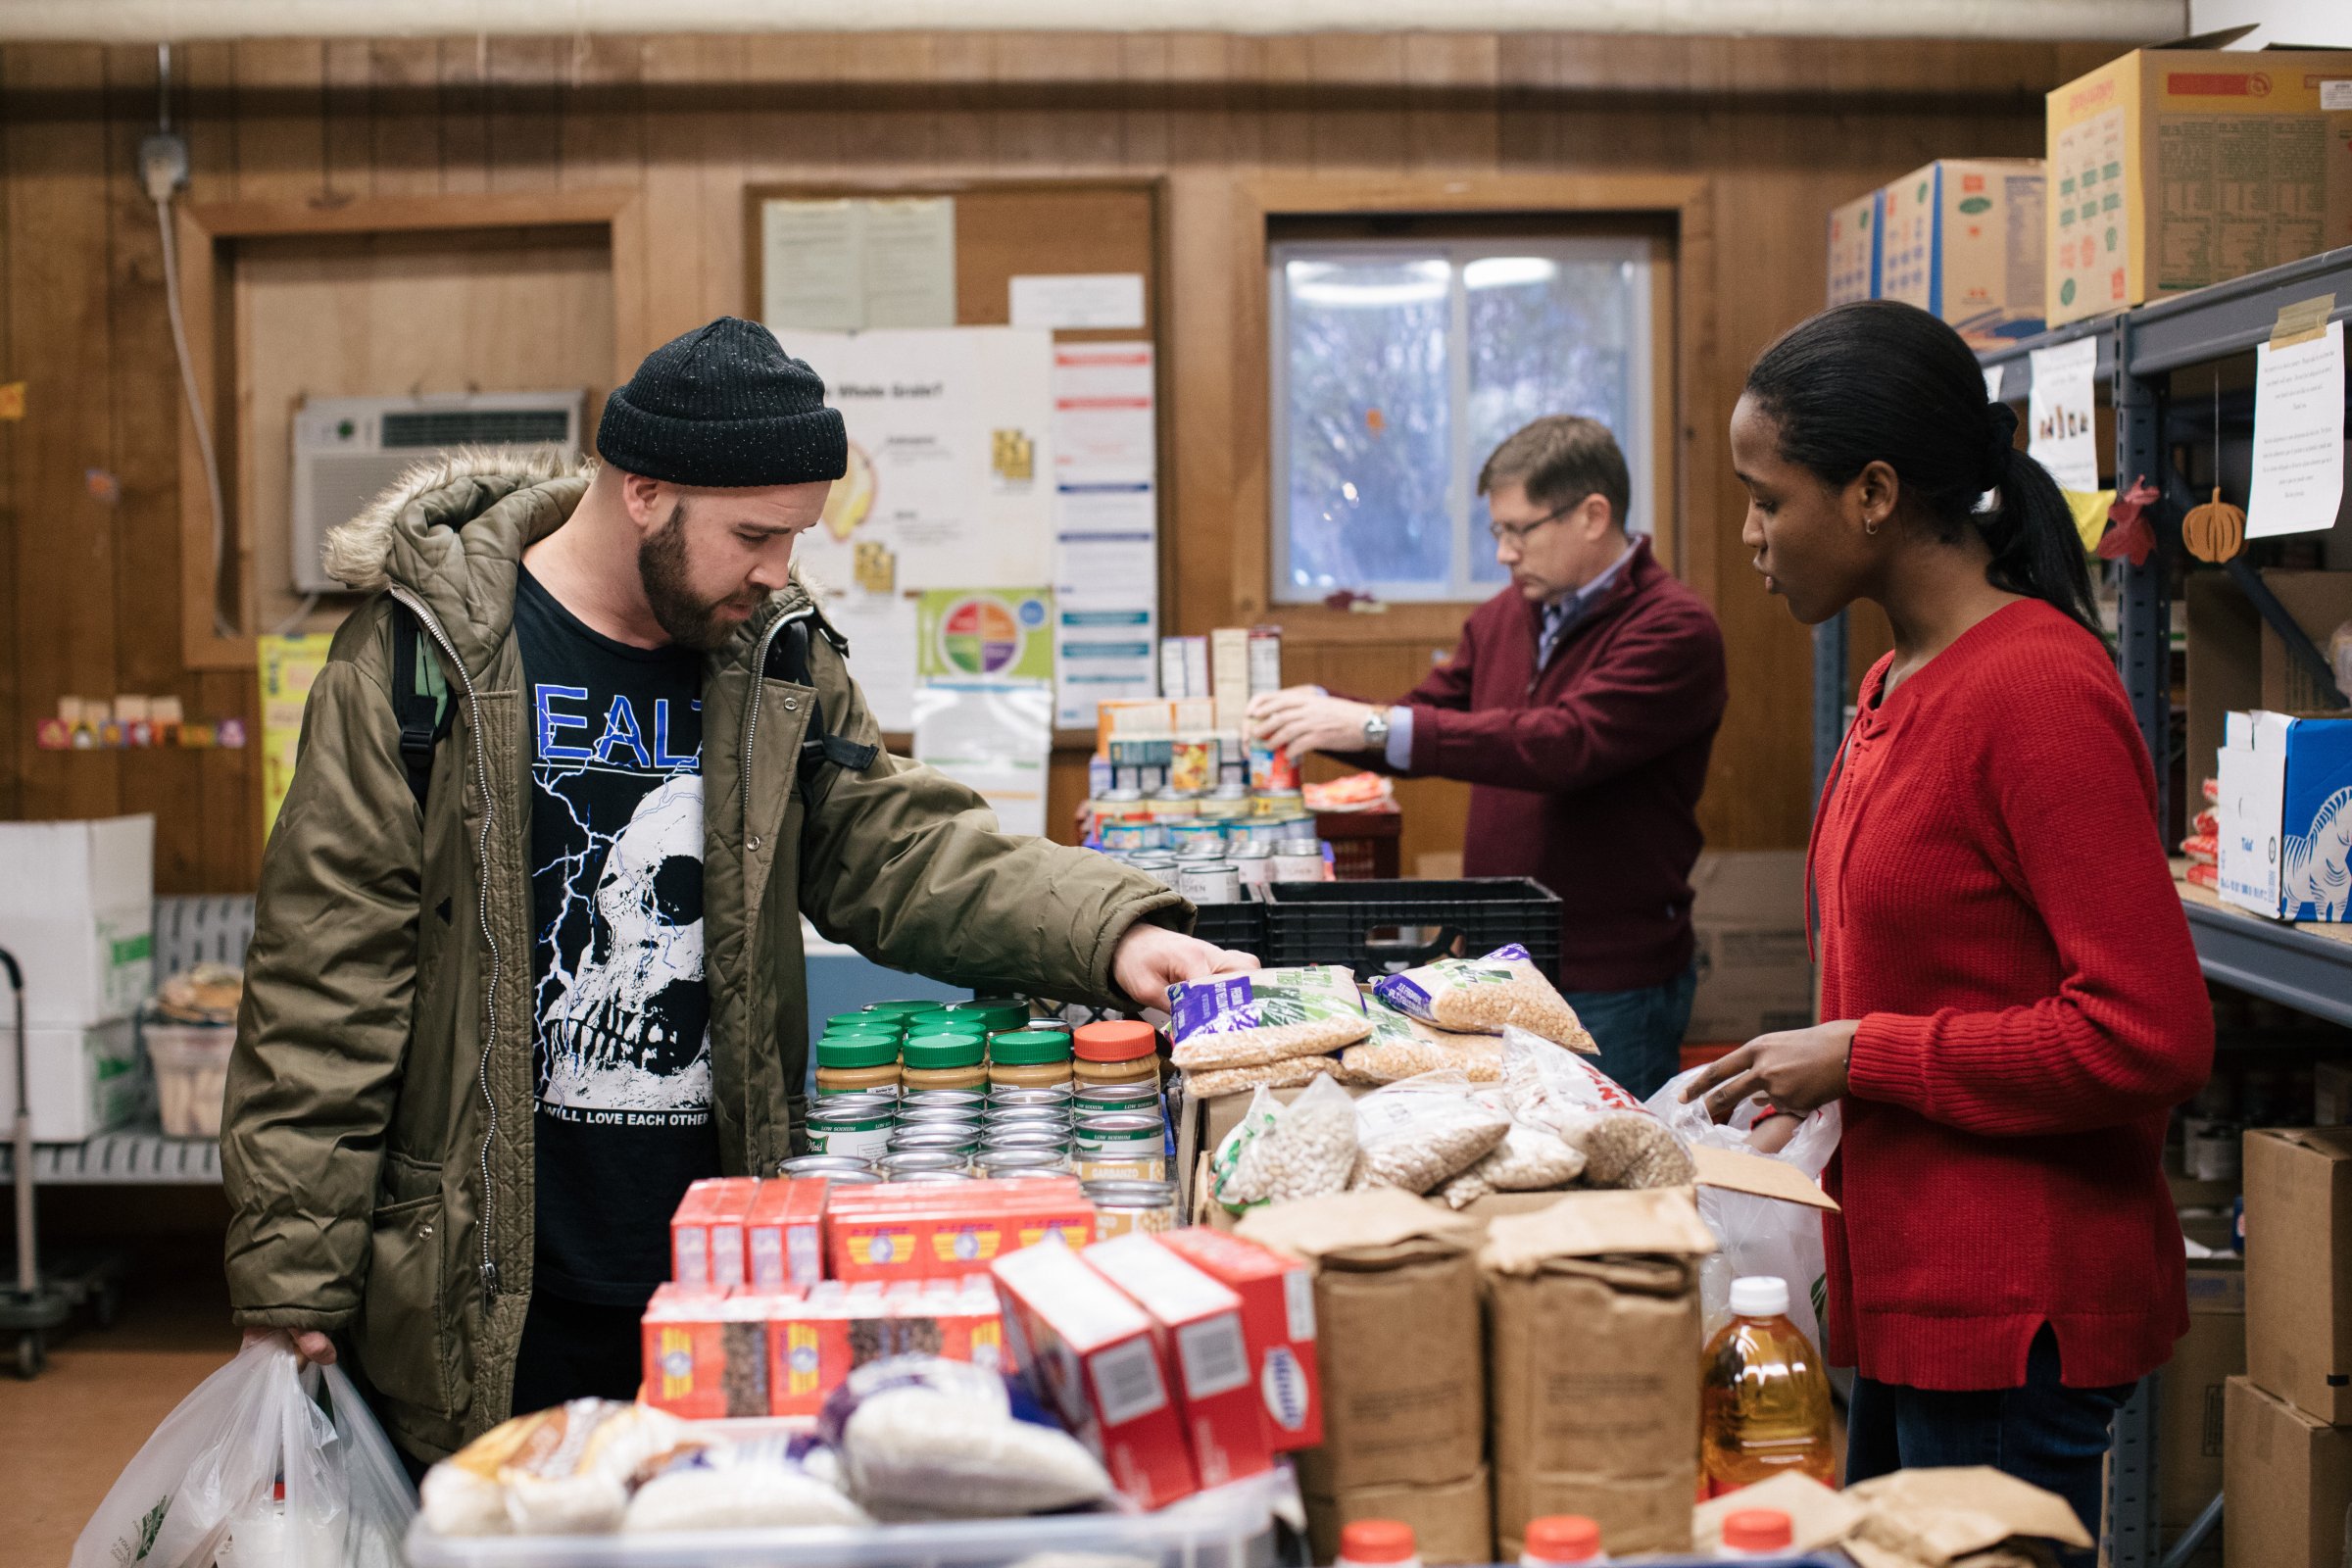 A volunteer helps a patron, on the left, at the St. Ignatius Church food pantry on Chicago’s North Side, part of the Greater Chicago Food Depository’s network.